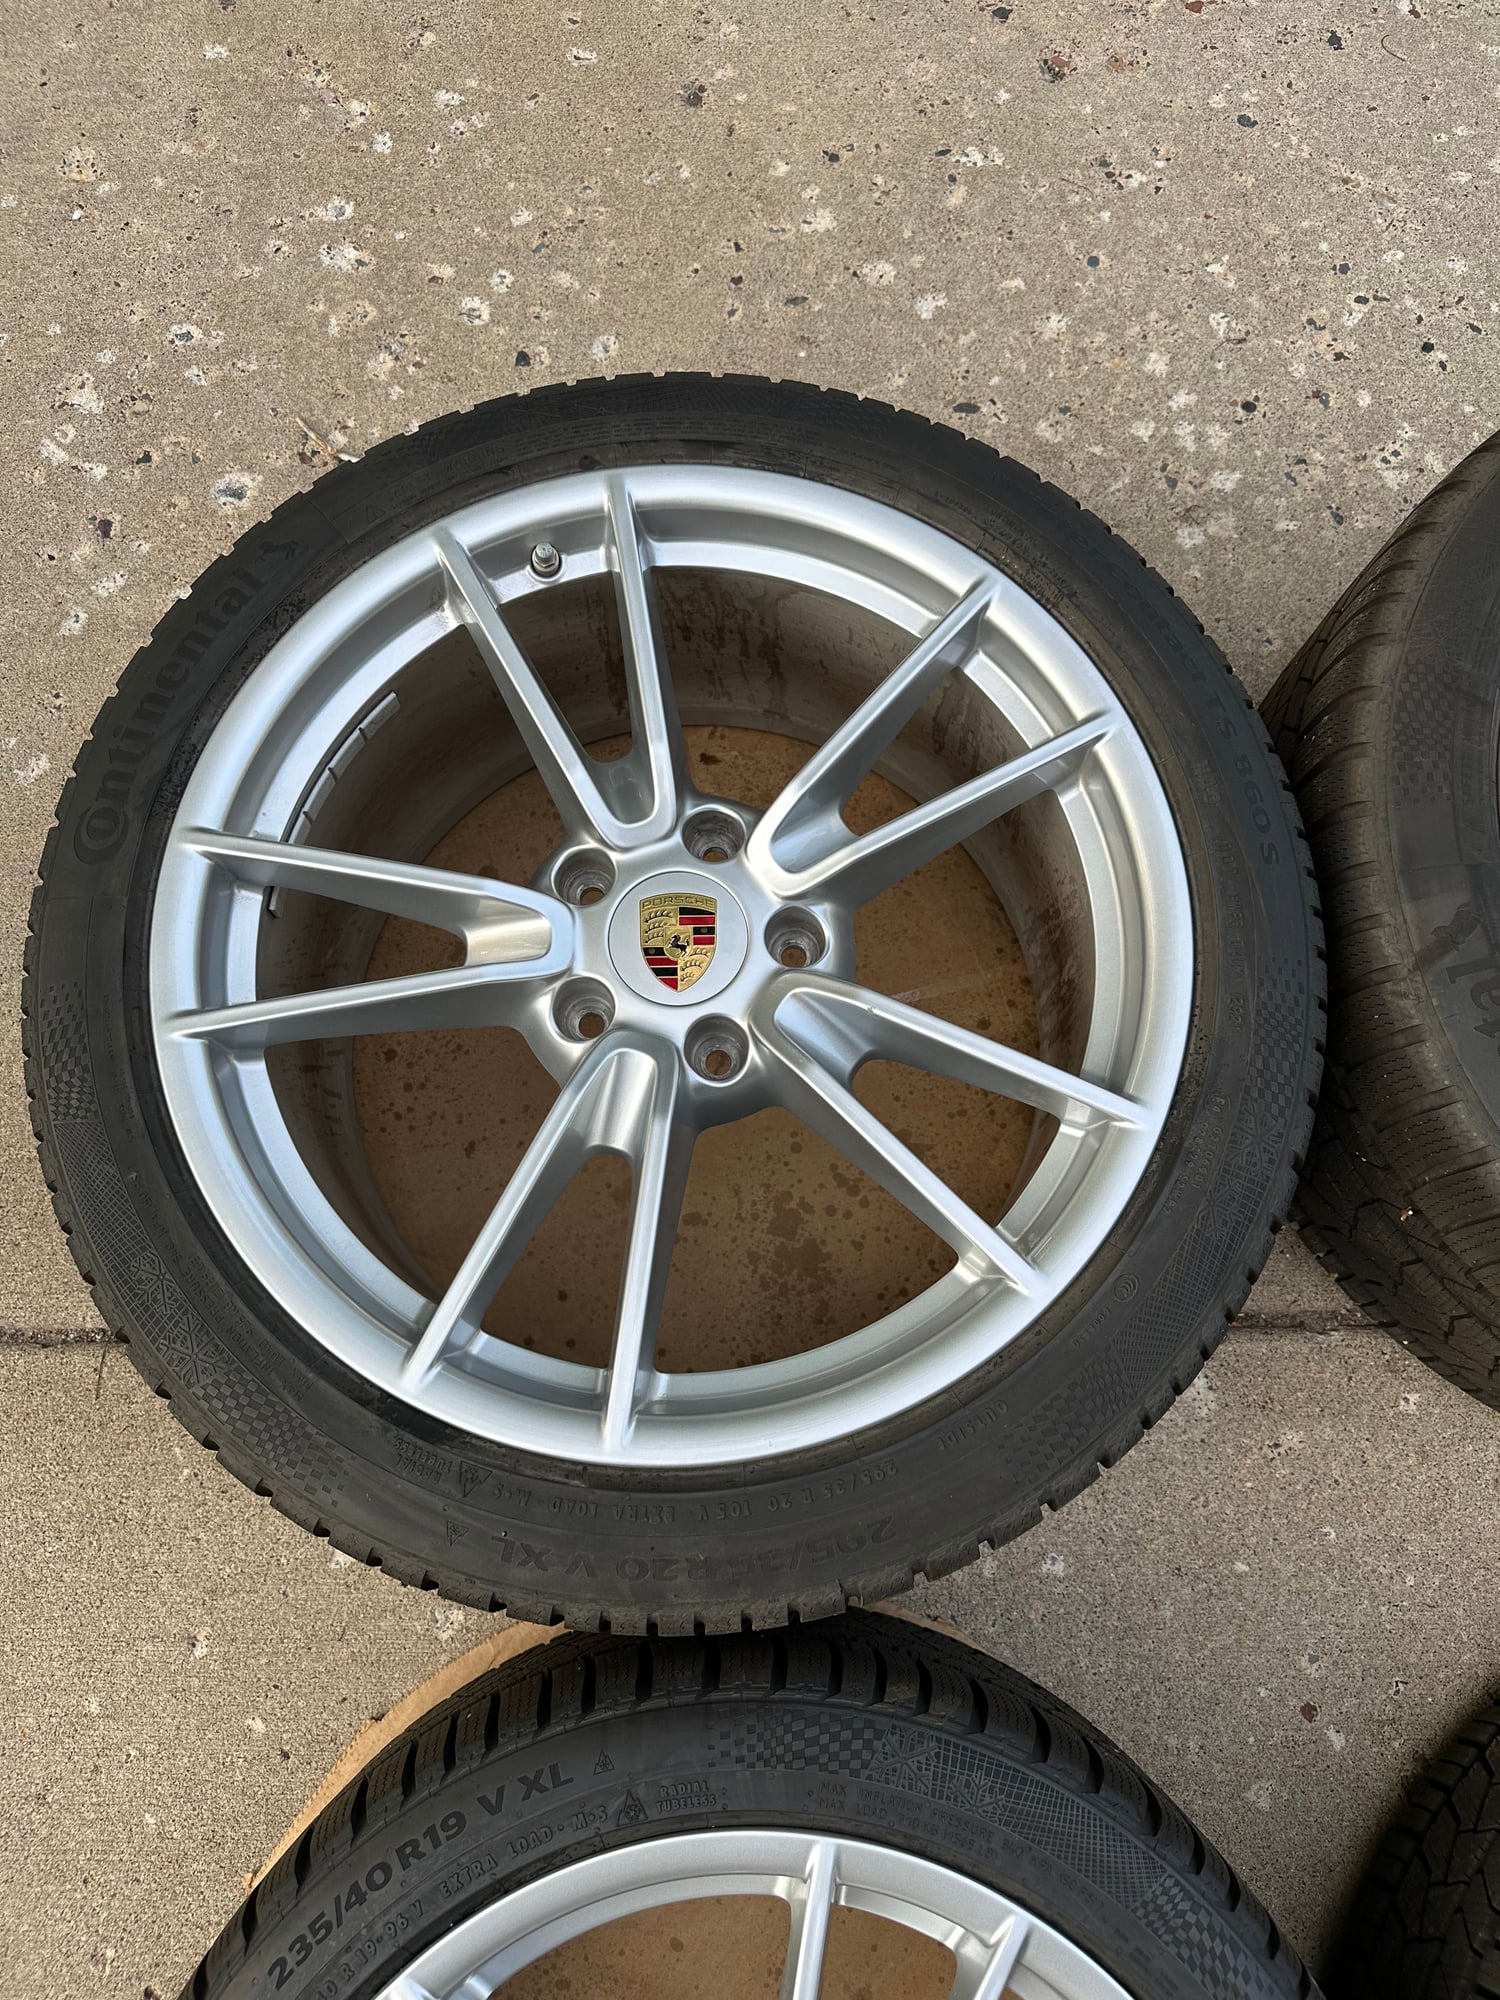 2020 Porsche Cayenne - 19/20" Carrera Winter Wheel Package - 992 OEM Wheels & Continental Tires - Wheels and Tires/Axles - $3,200 - Plymouth, MN 55447, United States